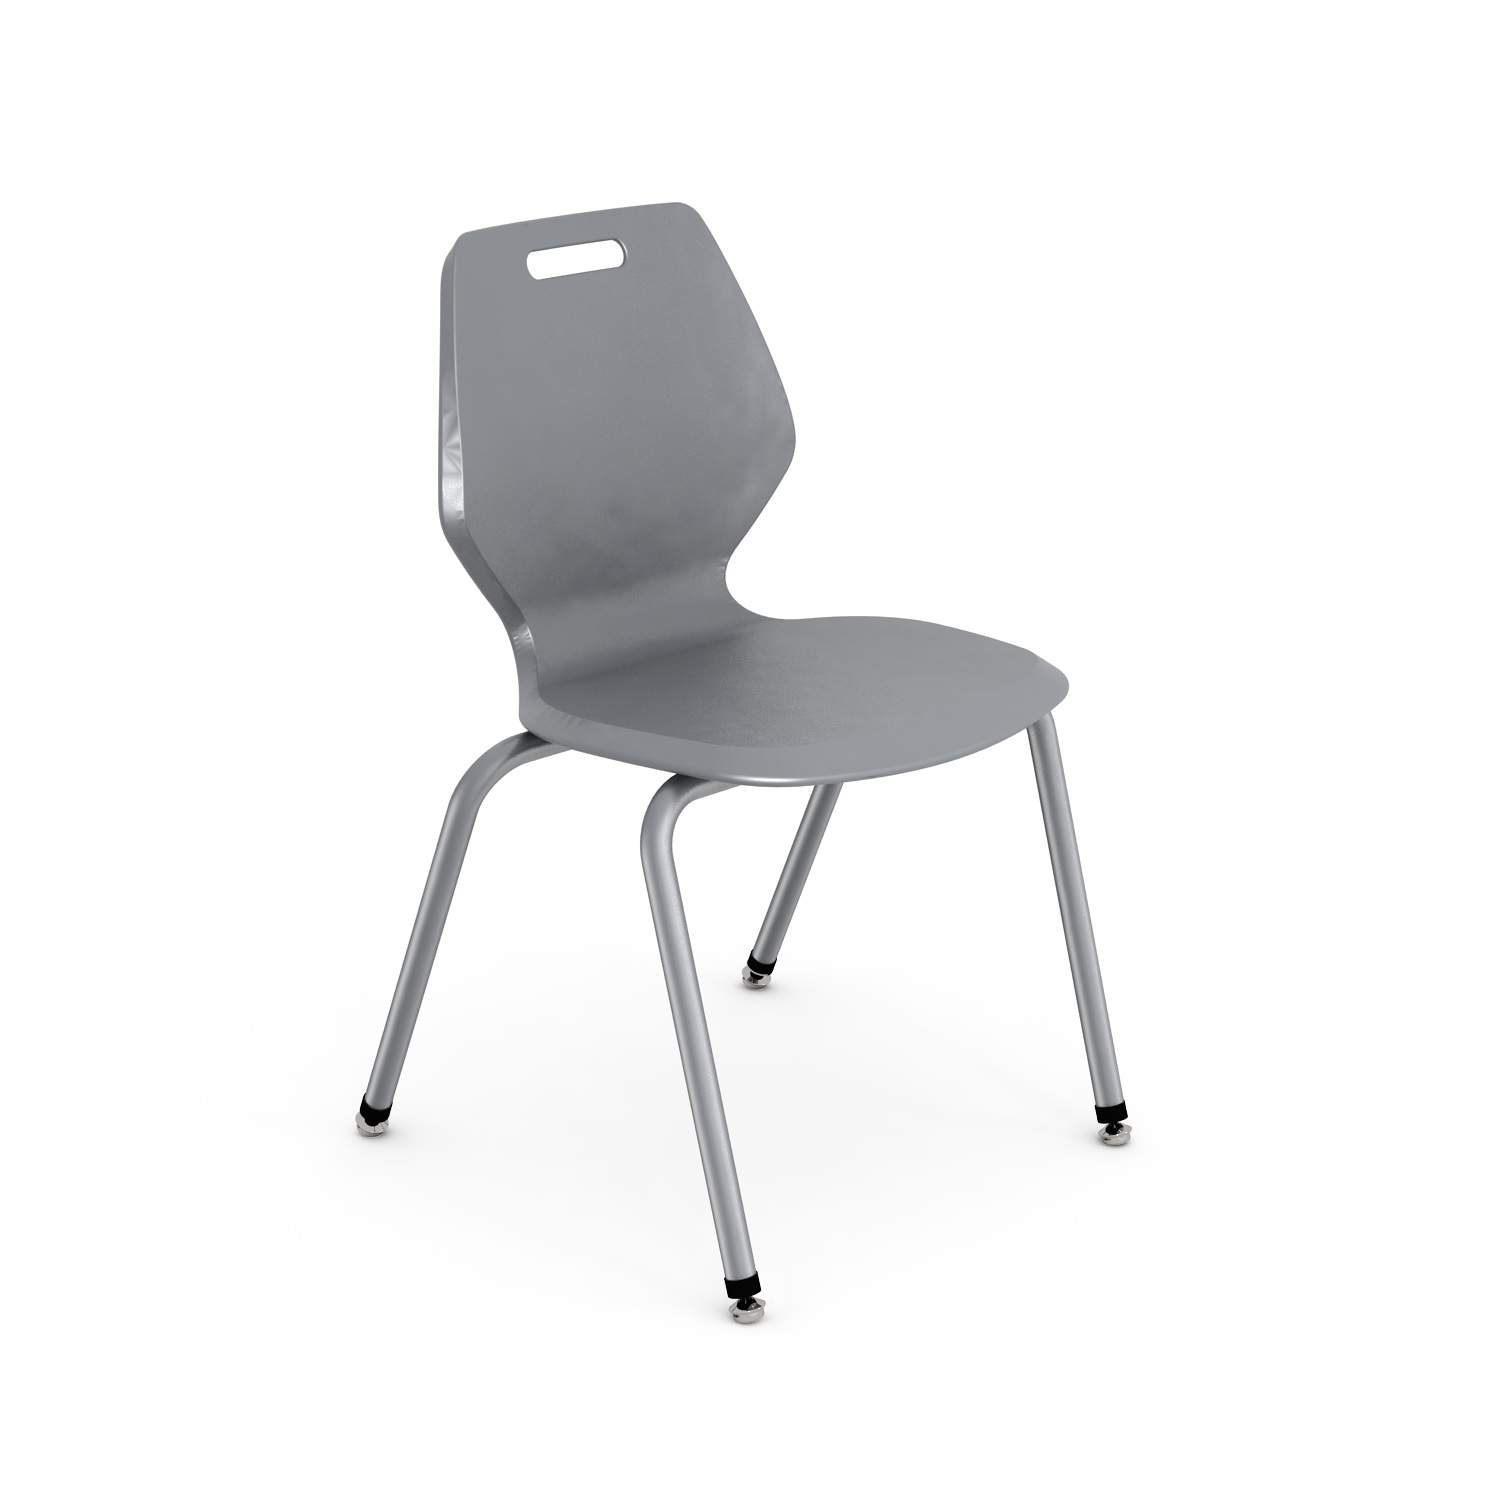 READY CHAIR COOL GRAY - PARAGON FURNITURE